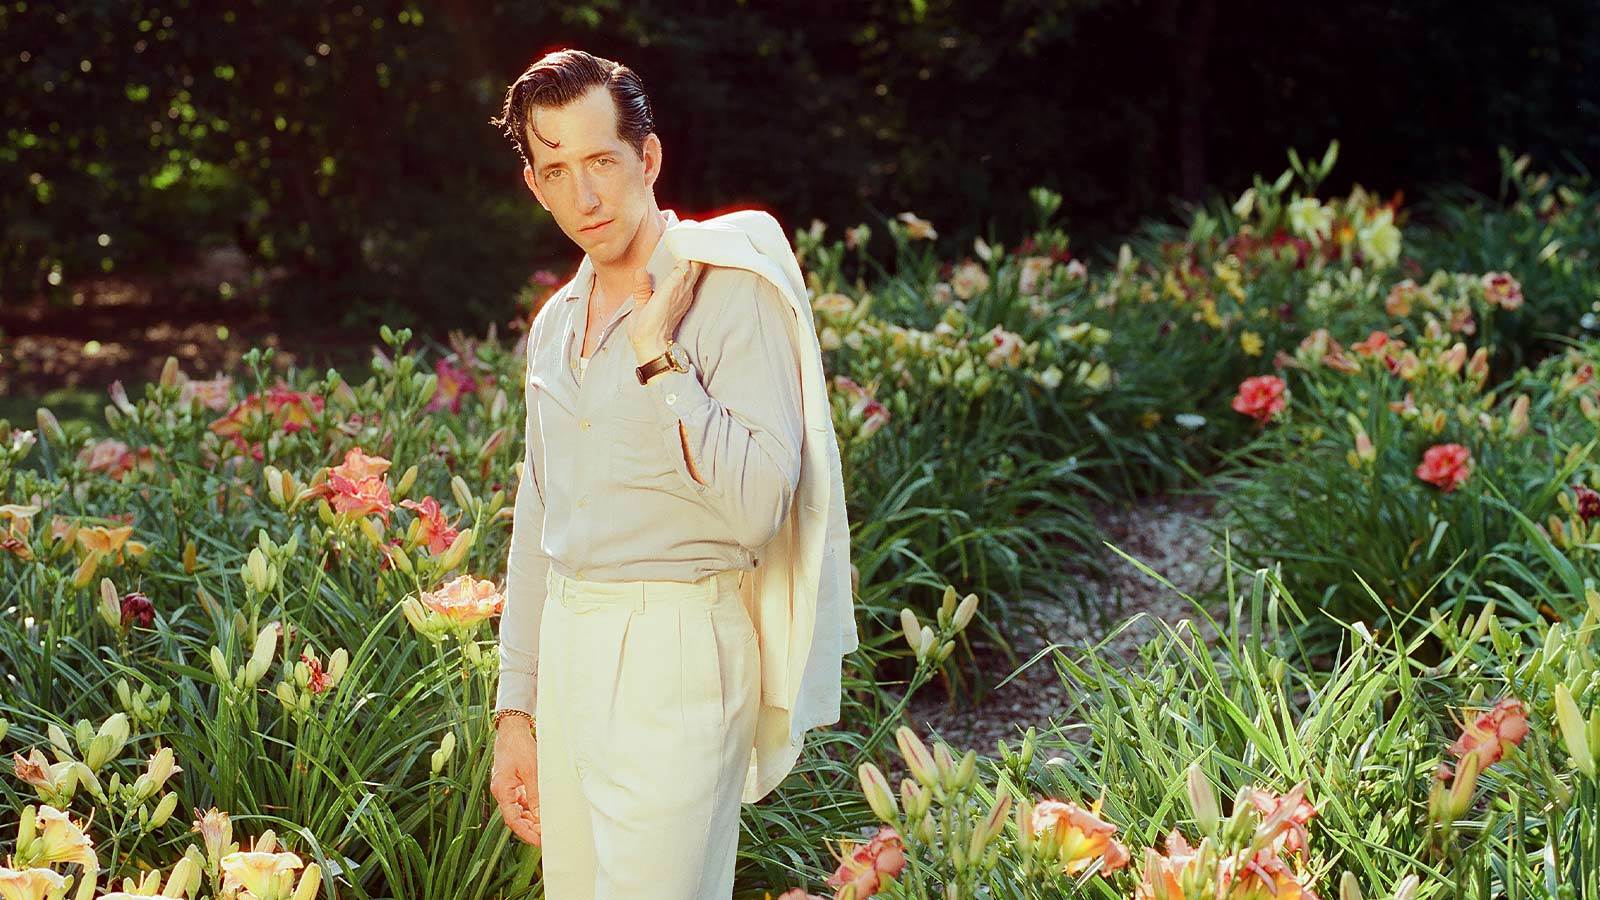 Artist Pokey Lafarge in a cream colored suit in front of a garden of lilies. He has is blazer draped over his shoulder.